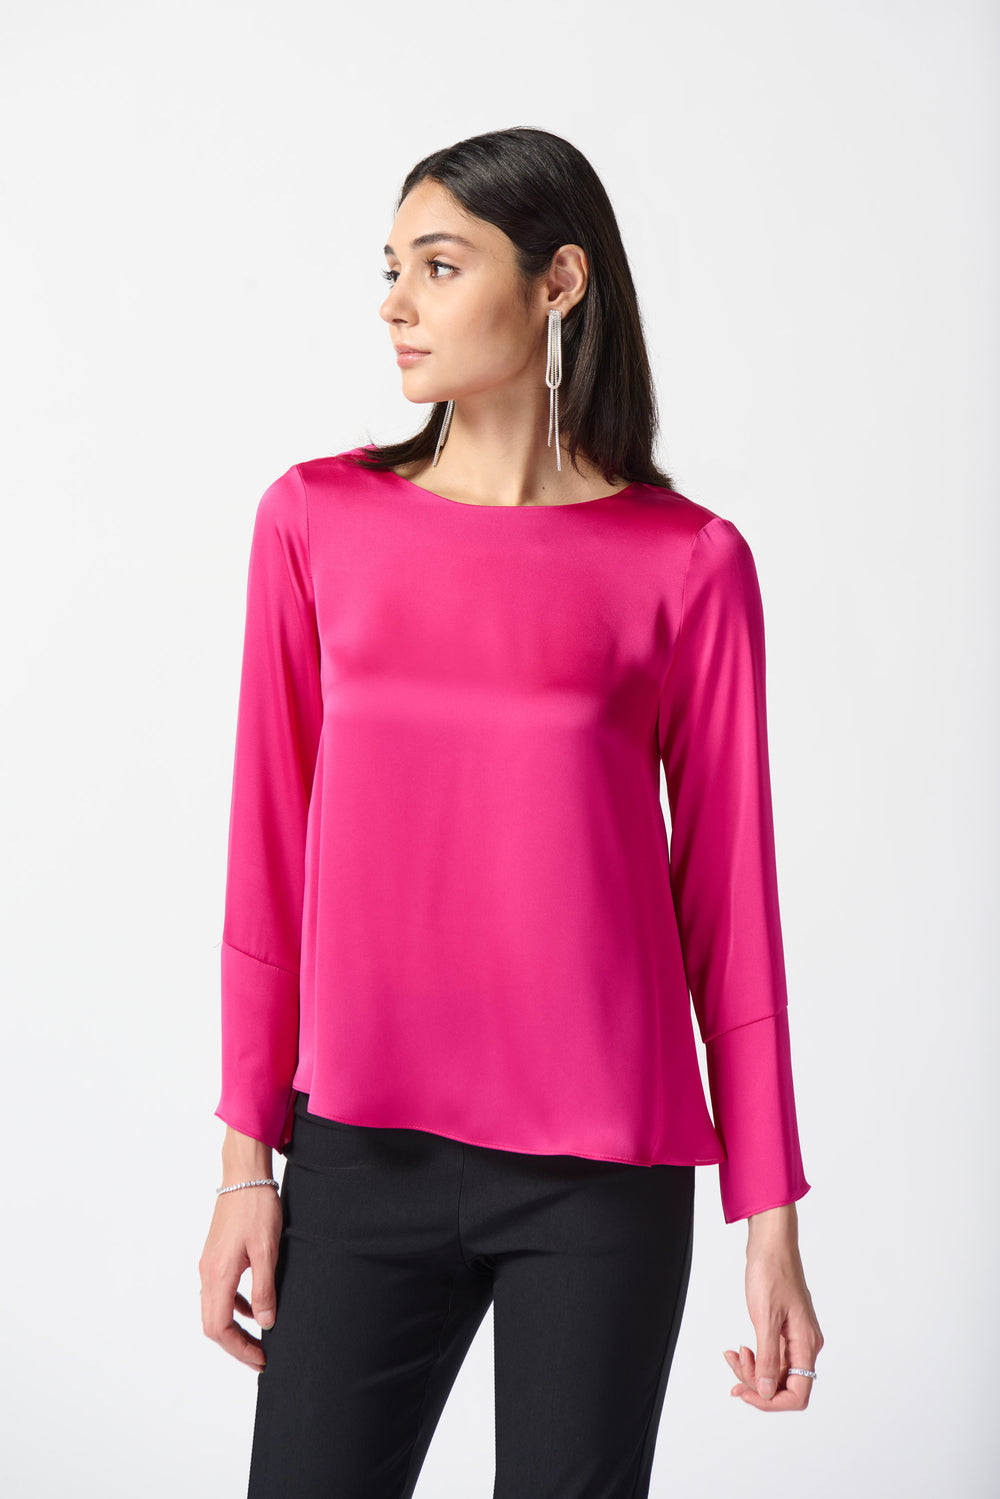 Joseph Ribkoff Necklace Chain Satin Flared Top Style 234045 - Shocking Pink